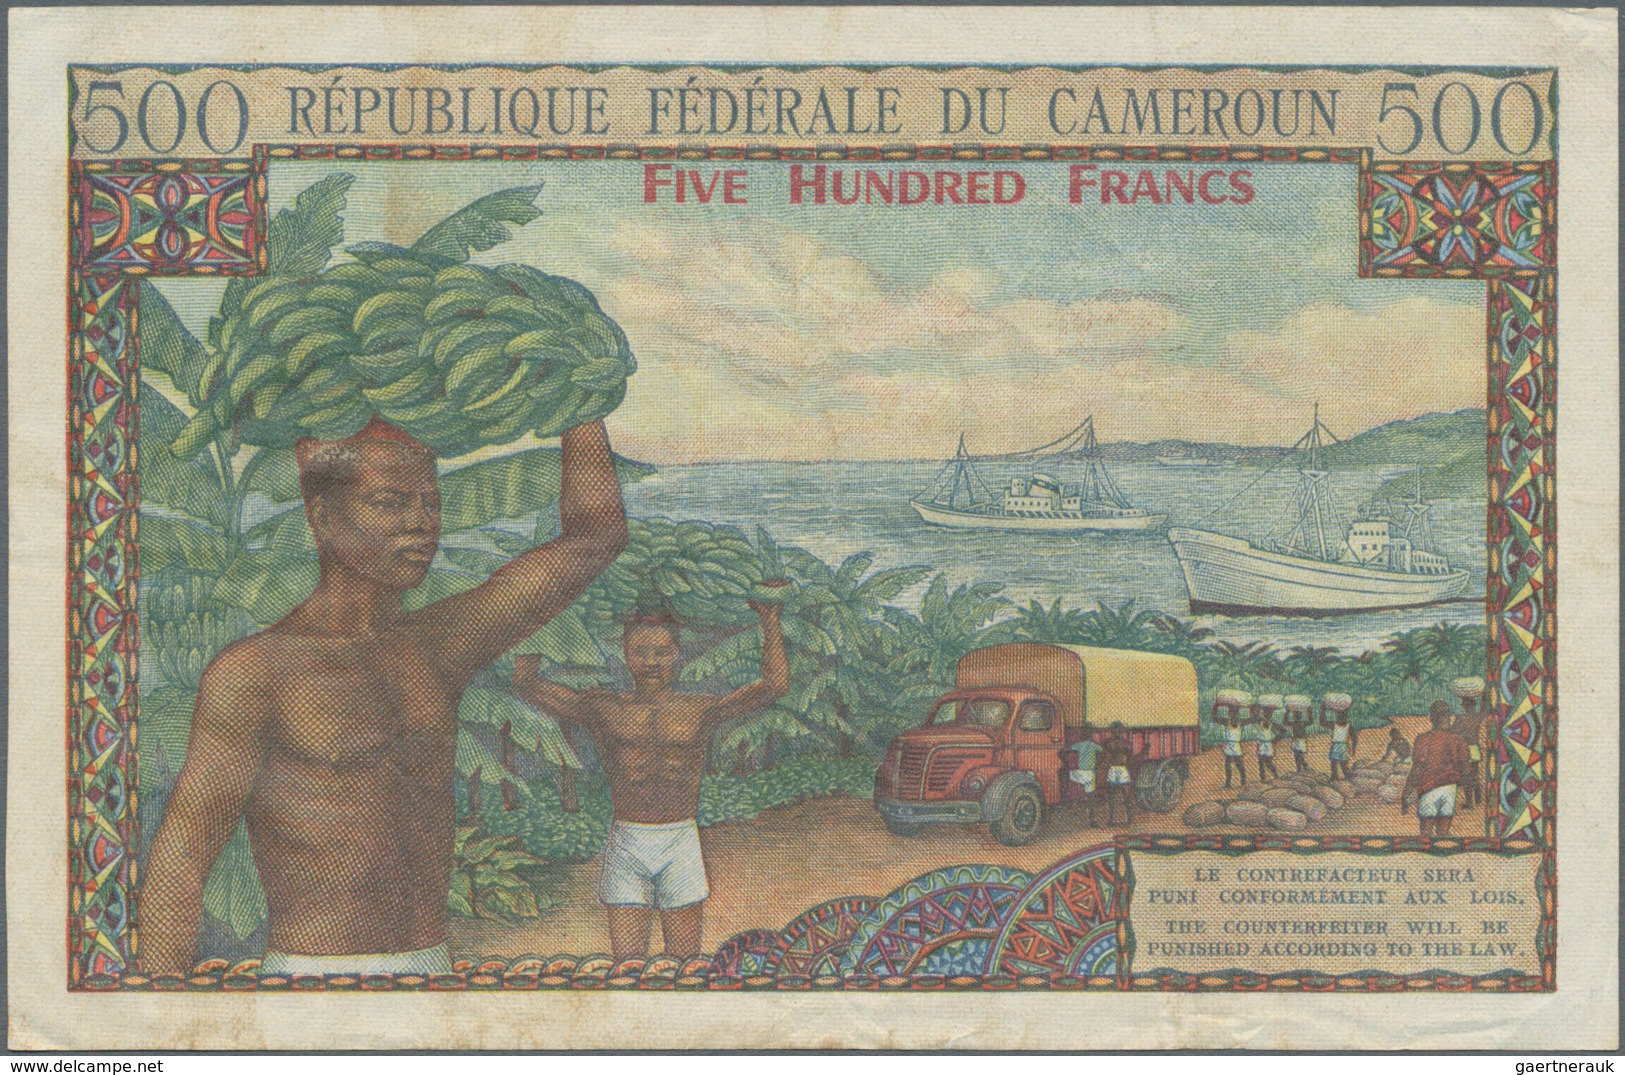 Cameroon / Kamerun: 500 Francs ND (1962) P. 11, Used With Light Folds And Creases, No Holes Or Tears - Kameroen